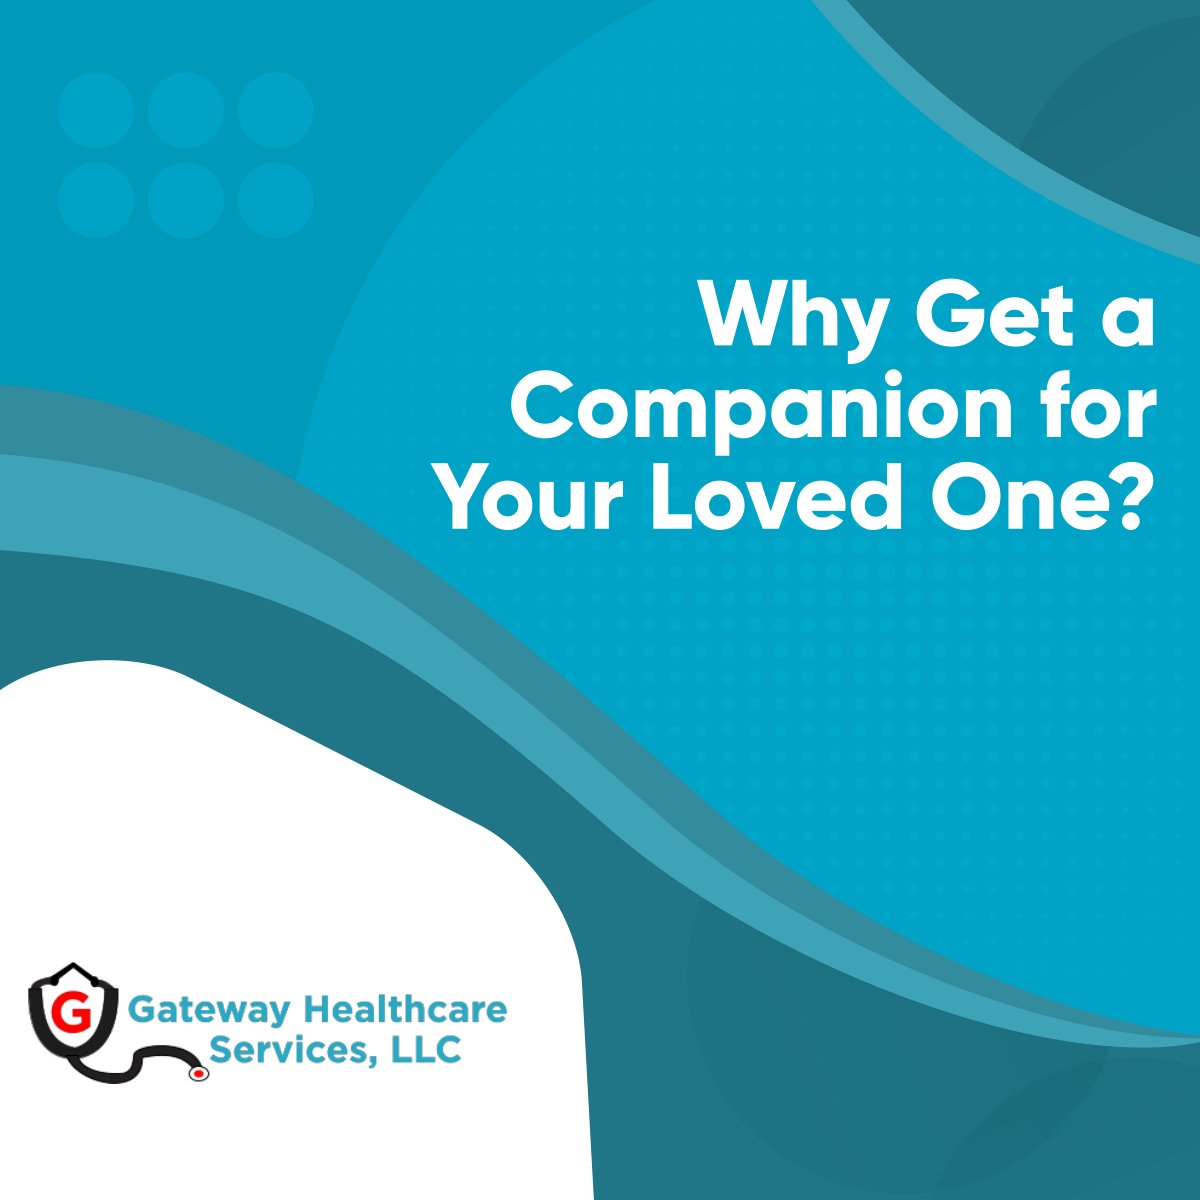 By hiring a companion for your loved one, you can help reduce their feelings of loneliness and isolation at home. Contact us today if you want to consider companionship.

#FairfaxVA #HealthcareServices #Companionship